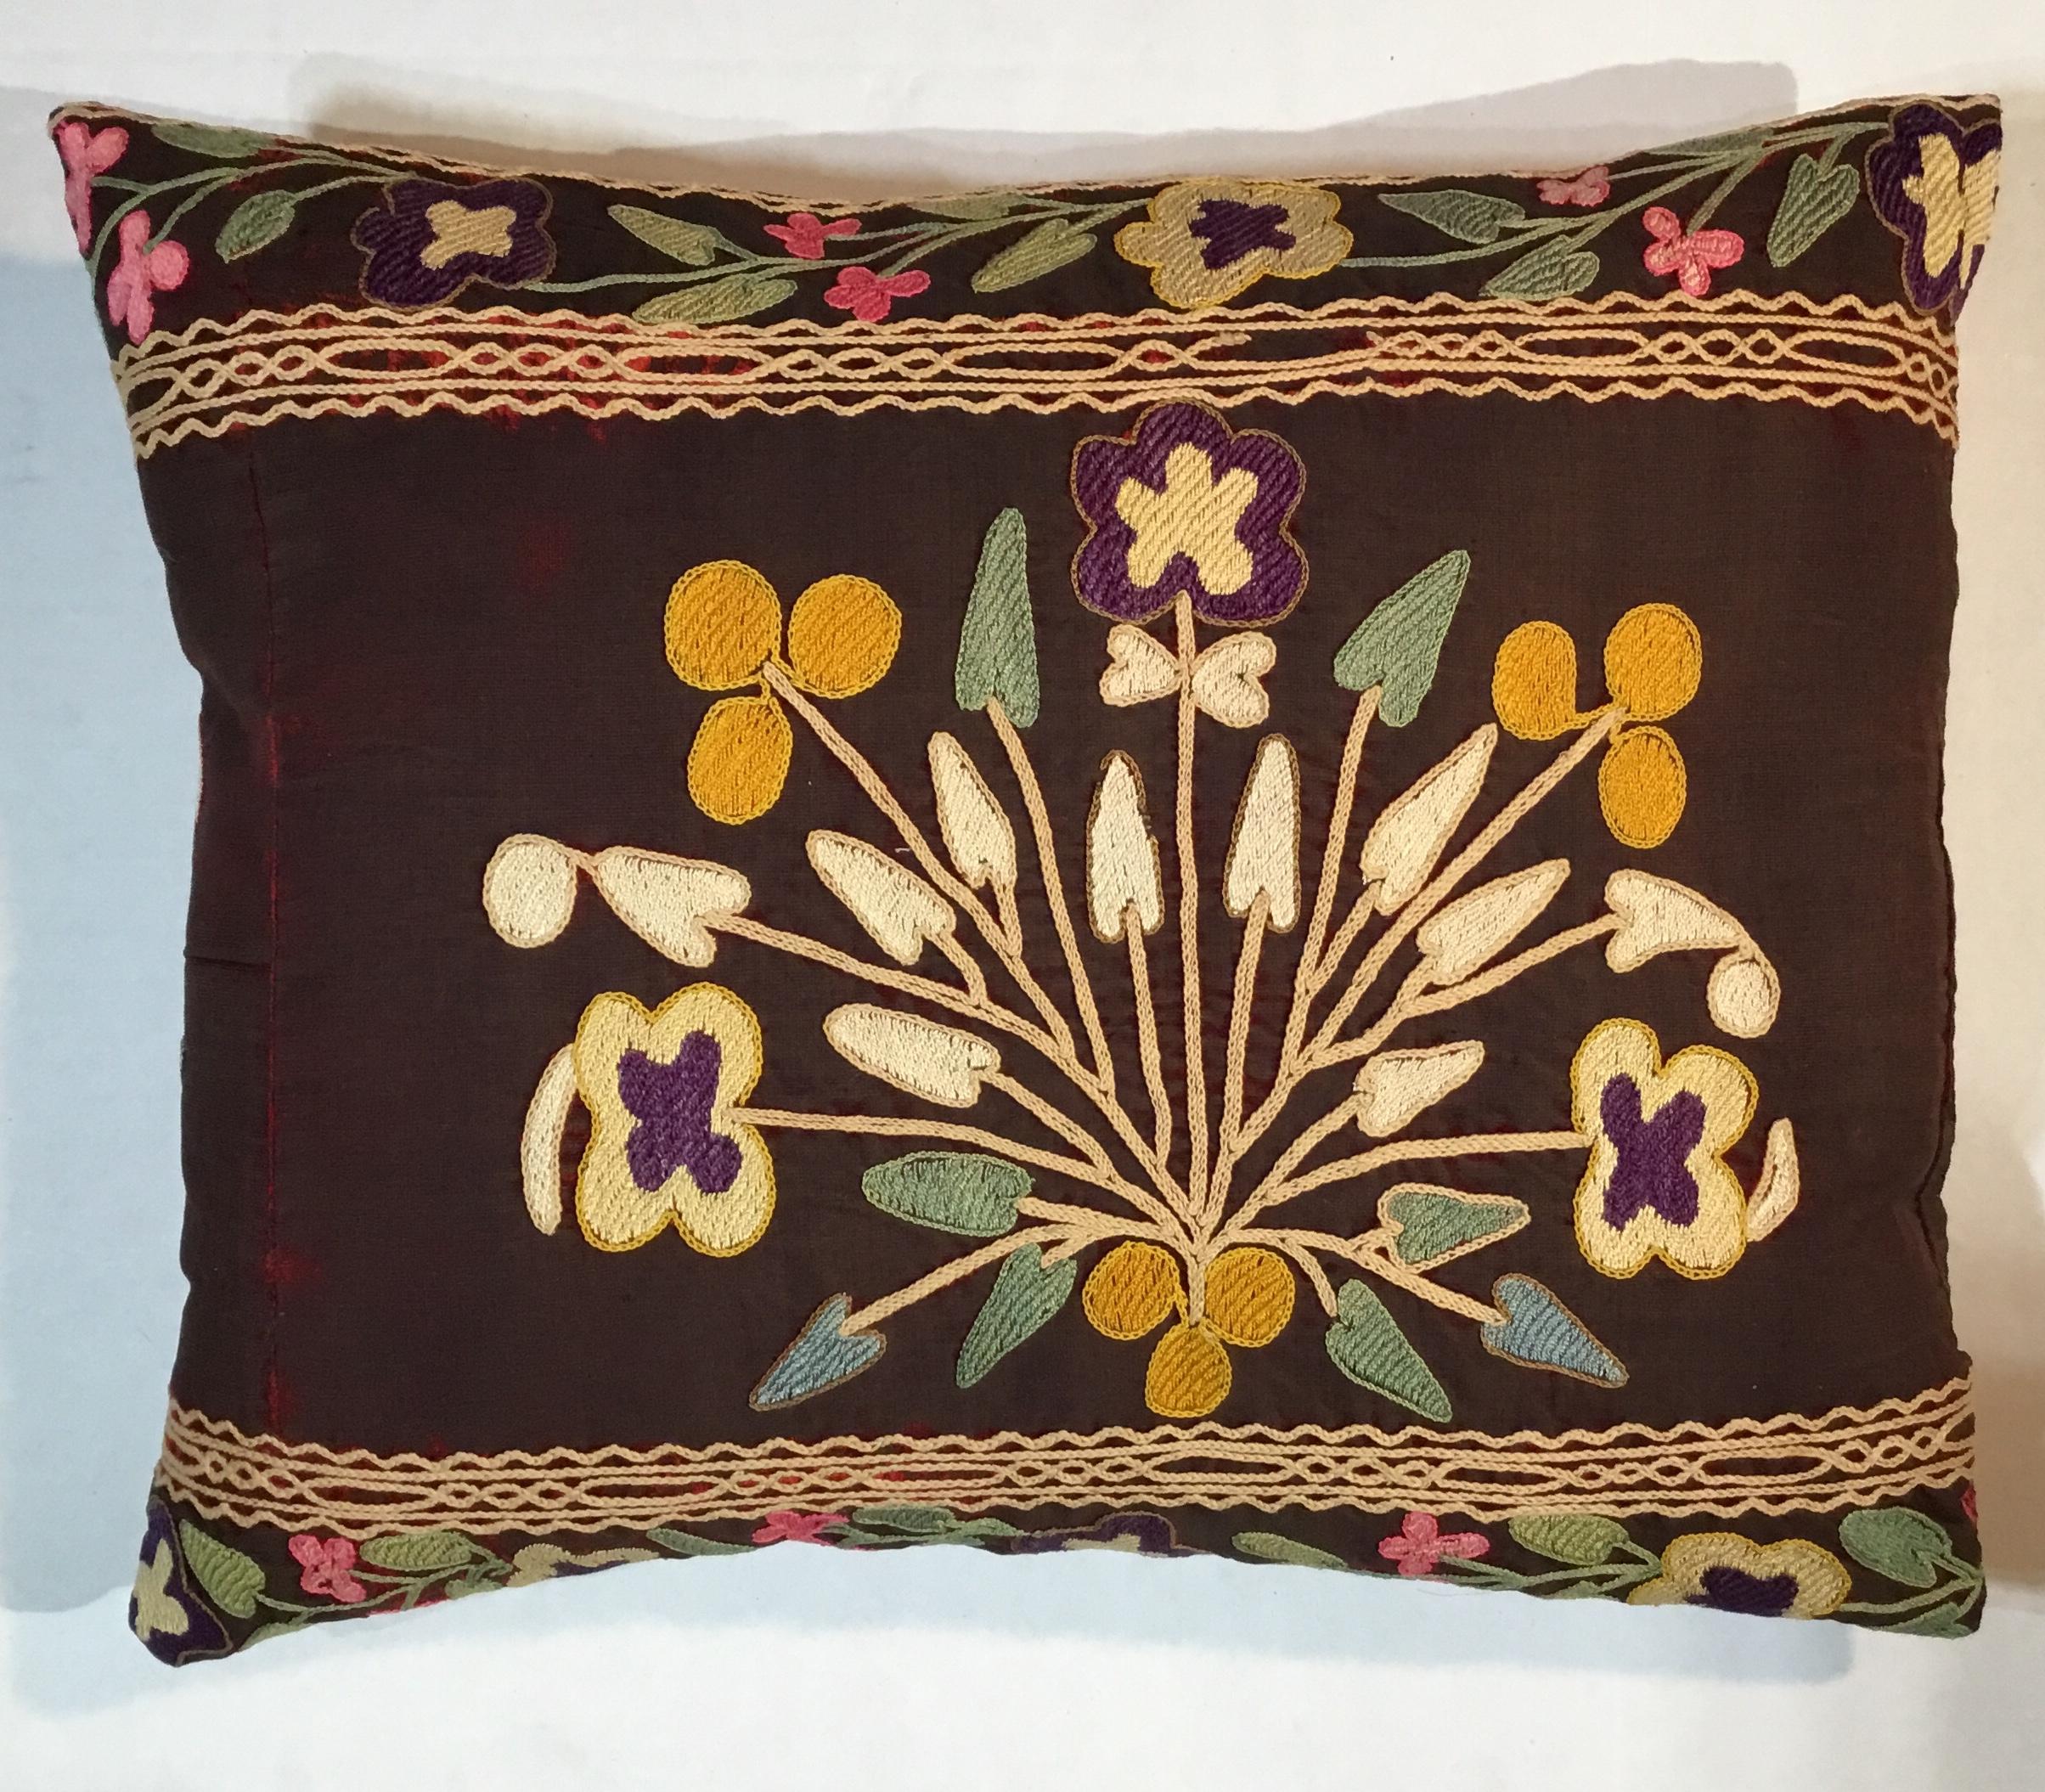 Exceptional pillow made of antique hand embroidery Suzani fragment, beautiful colors ,vines and flowers motifs Embroidery on antique oxidized wine color velvet background , quality cotton backing, fresh new insert.